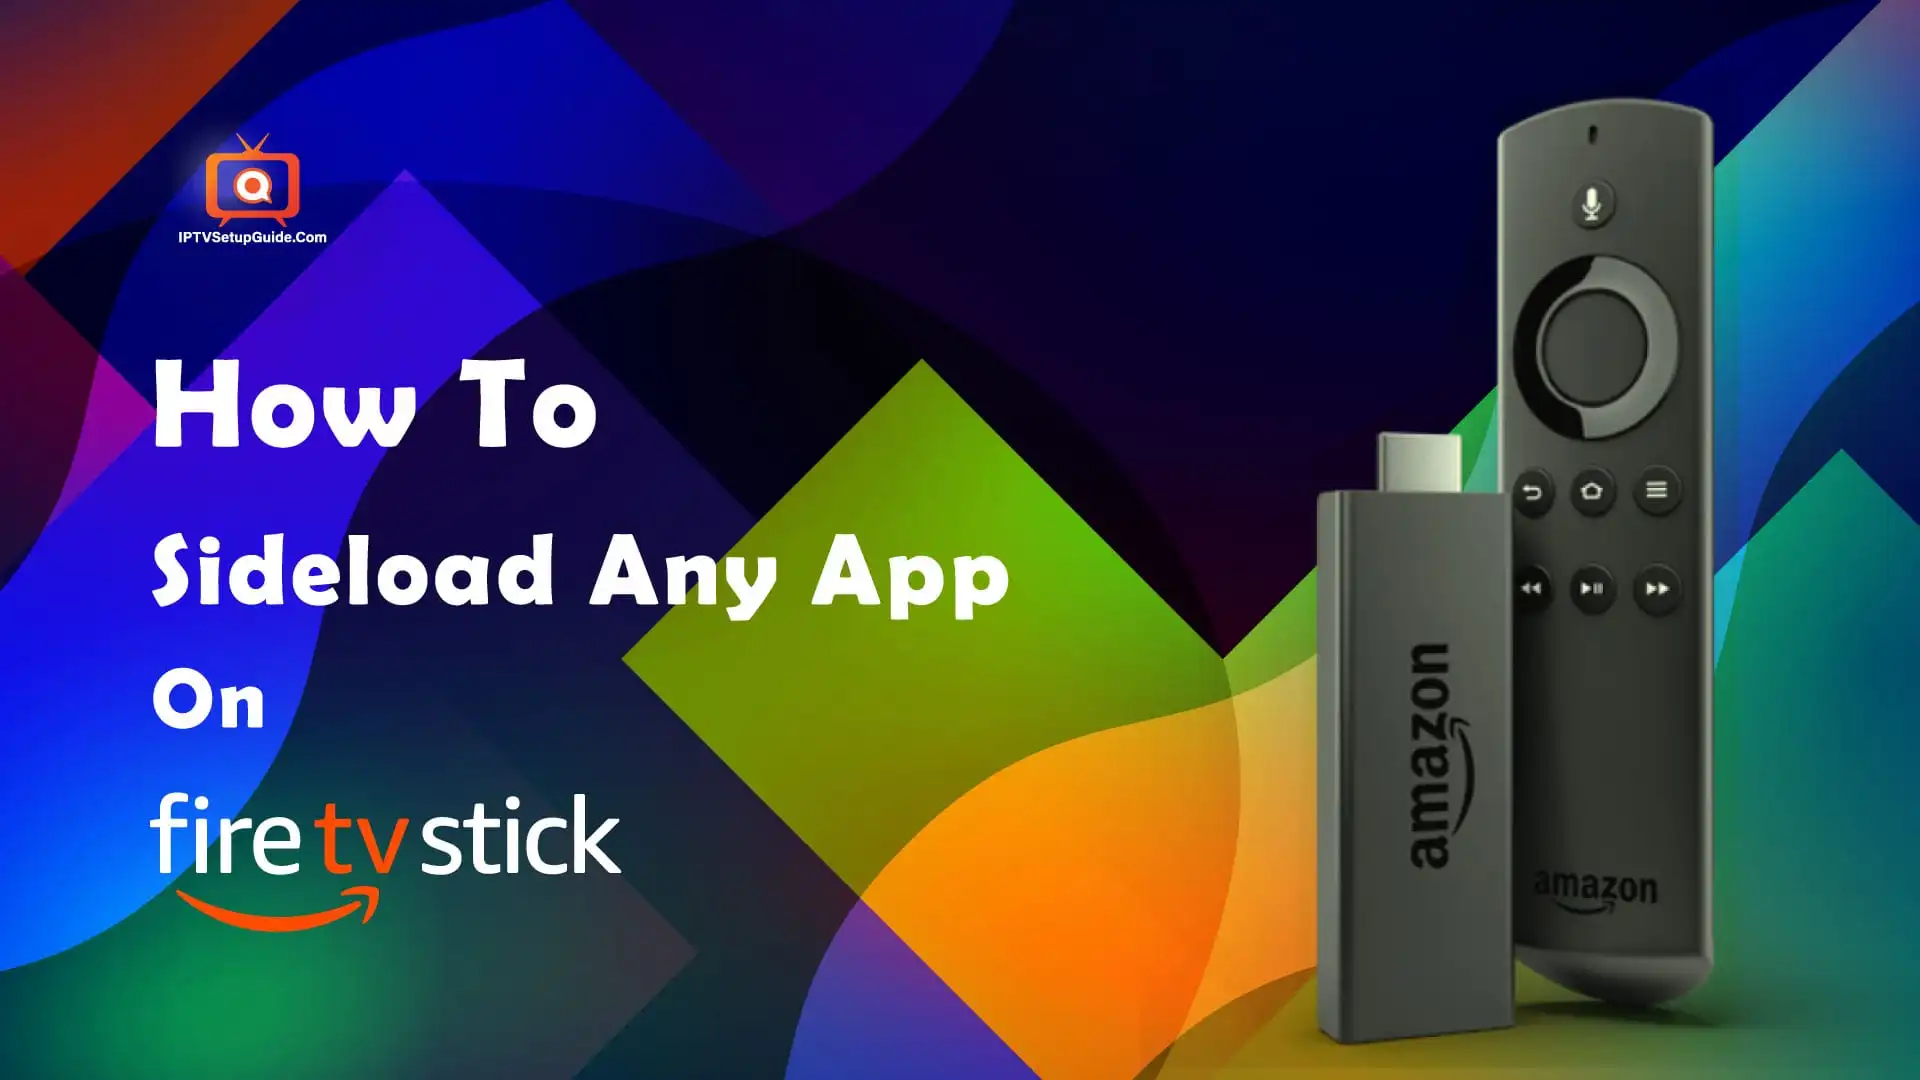 Android app for Amazon Firestick